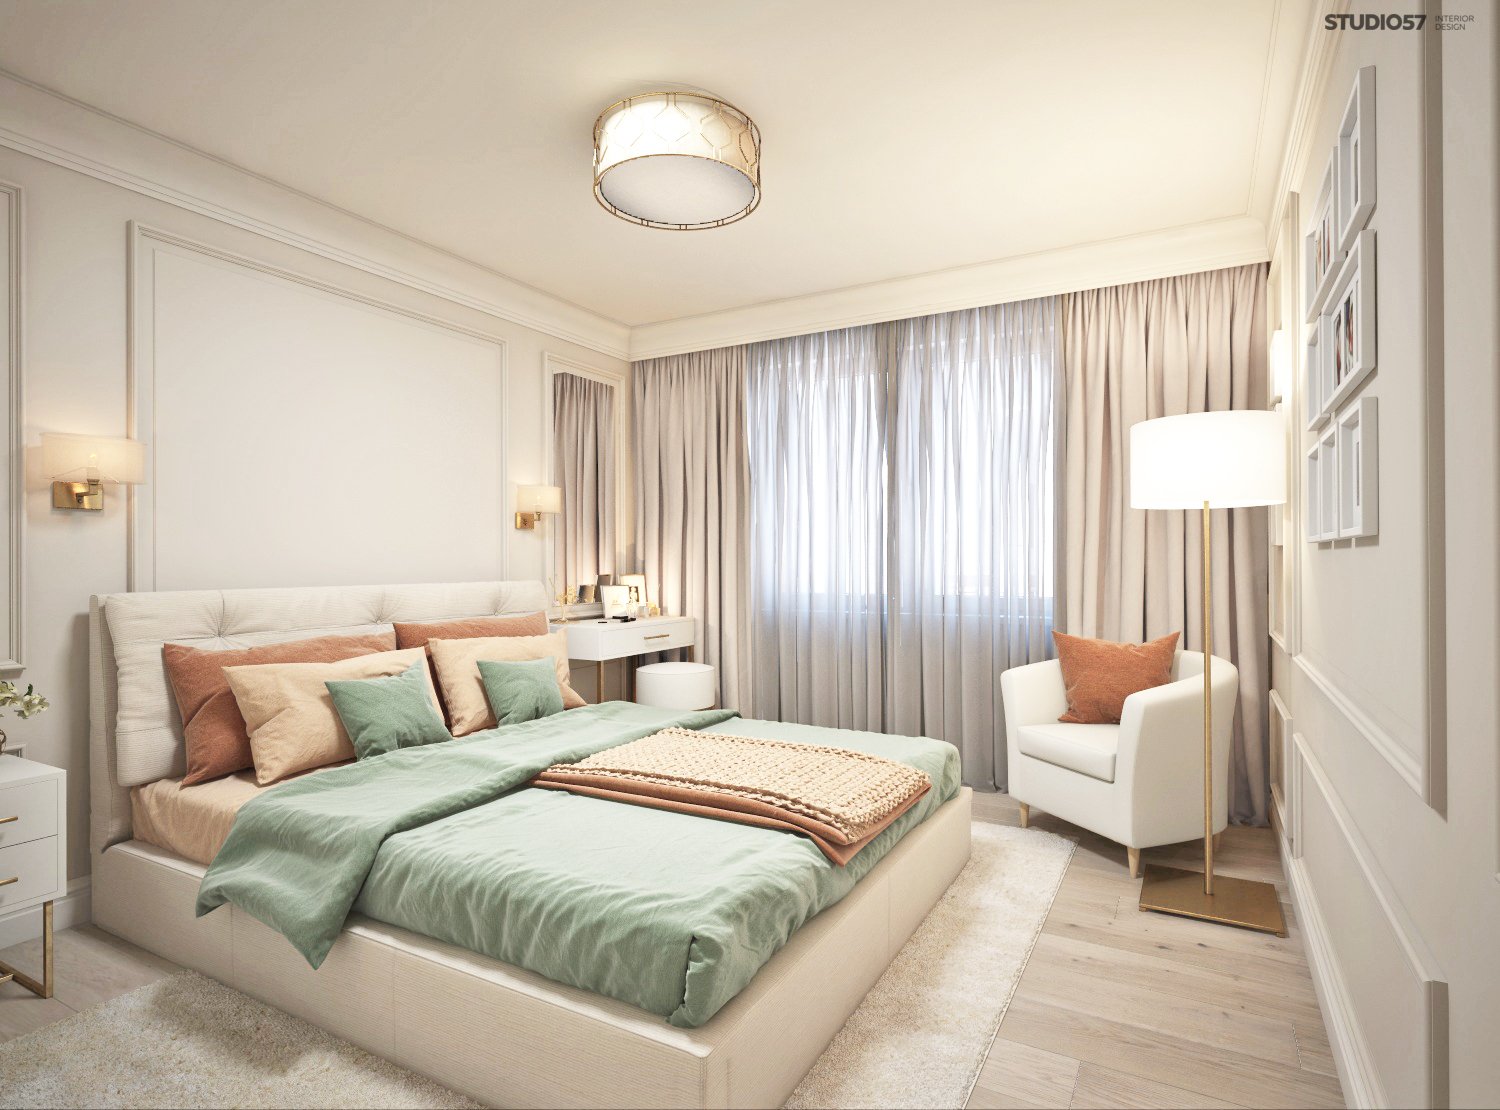 Interior of a modern bedroom photo